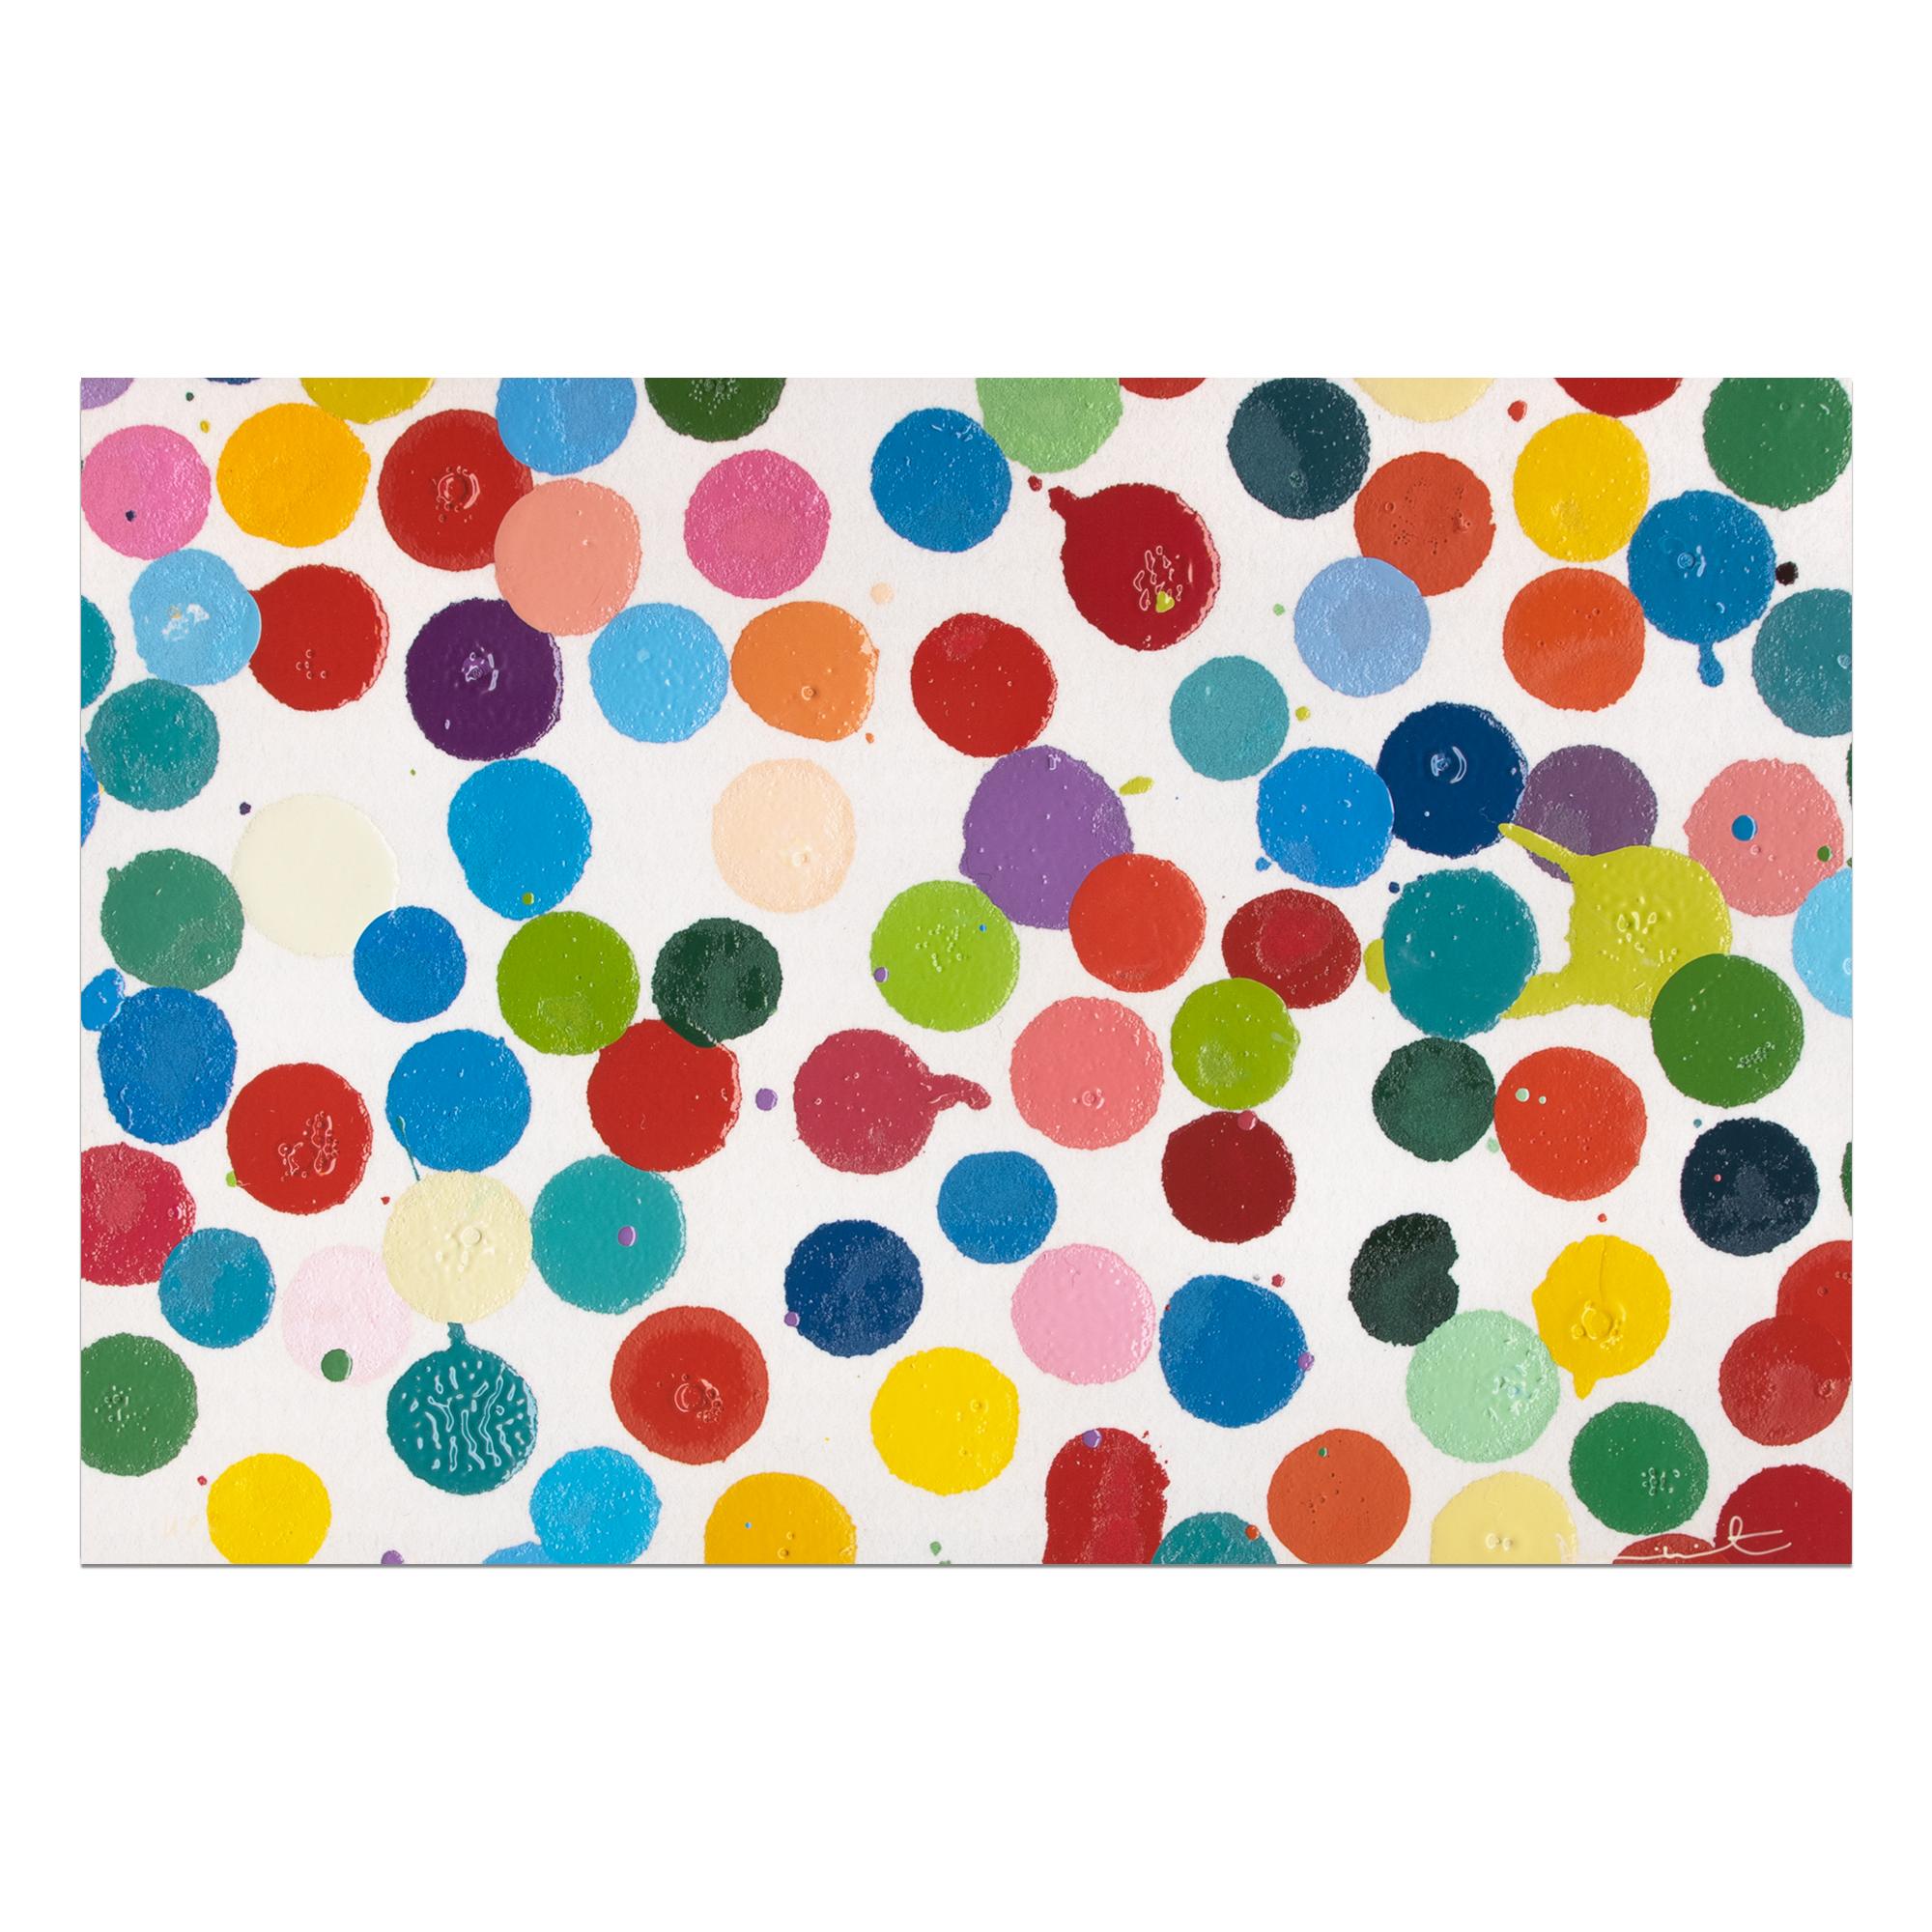 Damien Hirst (British, born 1965)
The Currency Unique Print (H11), 2022
Medium: Archival giclée print on paper
Dimensions: 100 × 150 cm (39 2/5 × 59 1/10 in)
Edition of 1000 unique prints: Hand-signed and numbered
Condition: Excellent